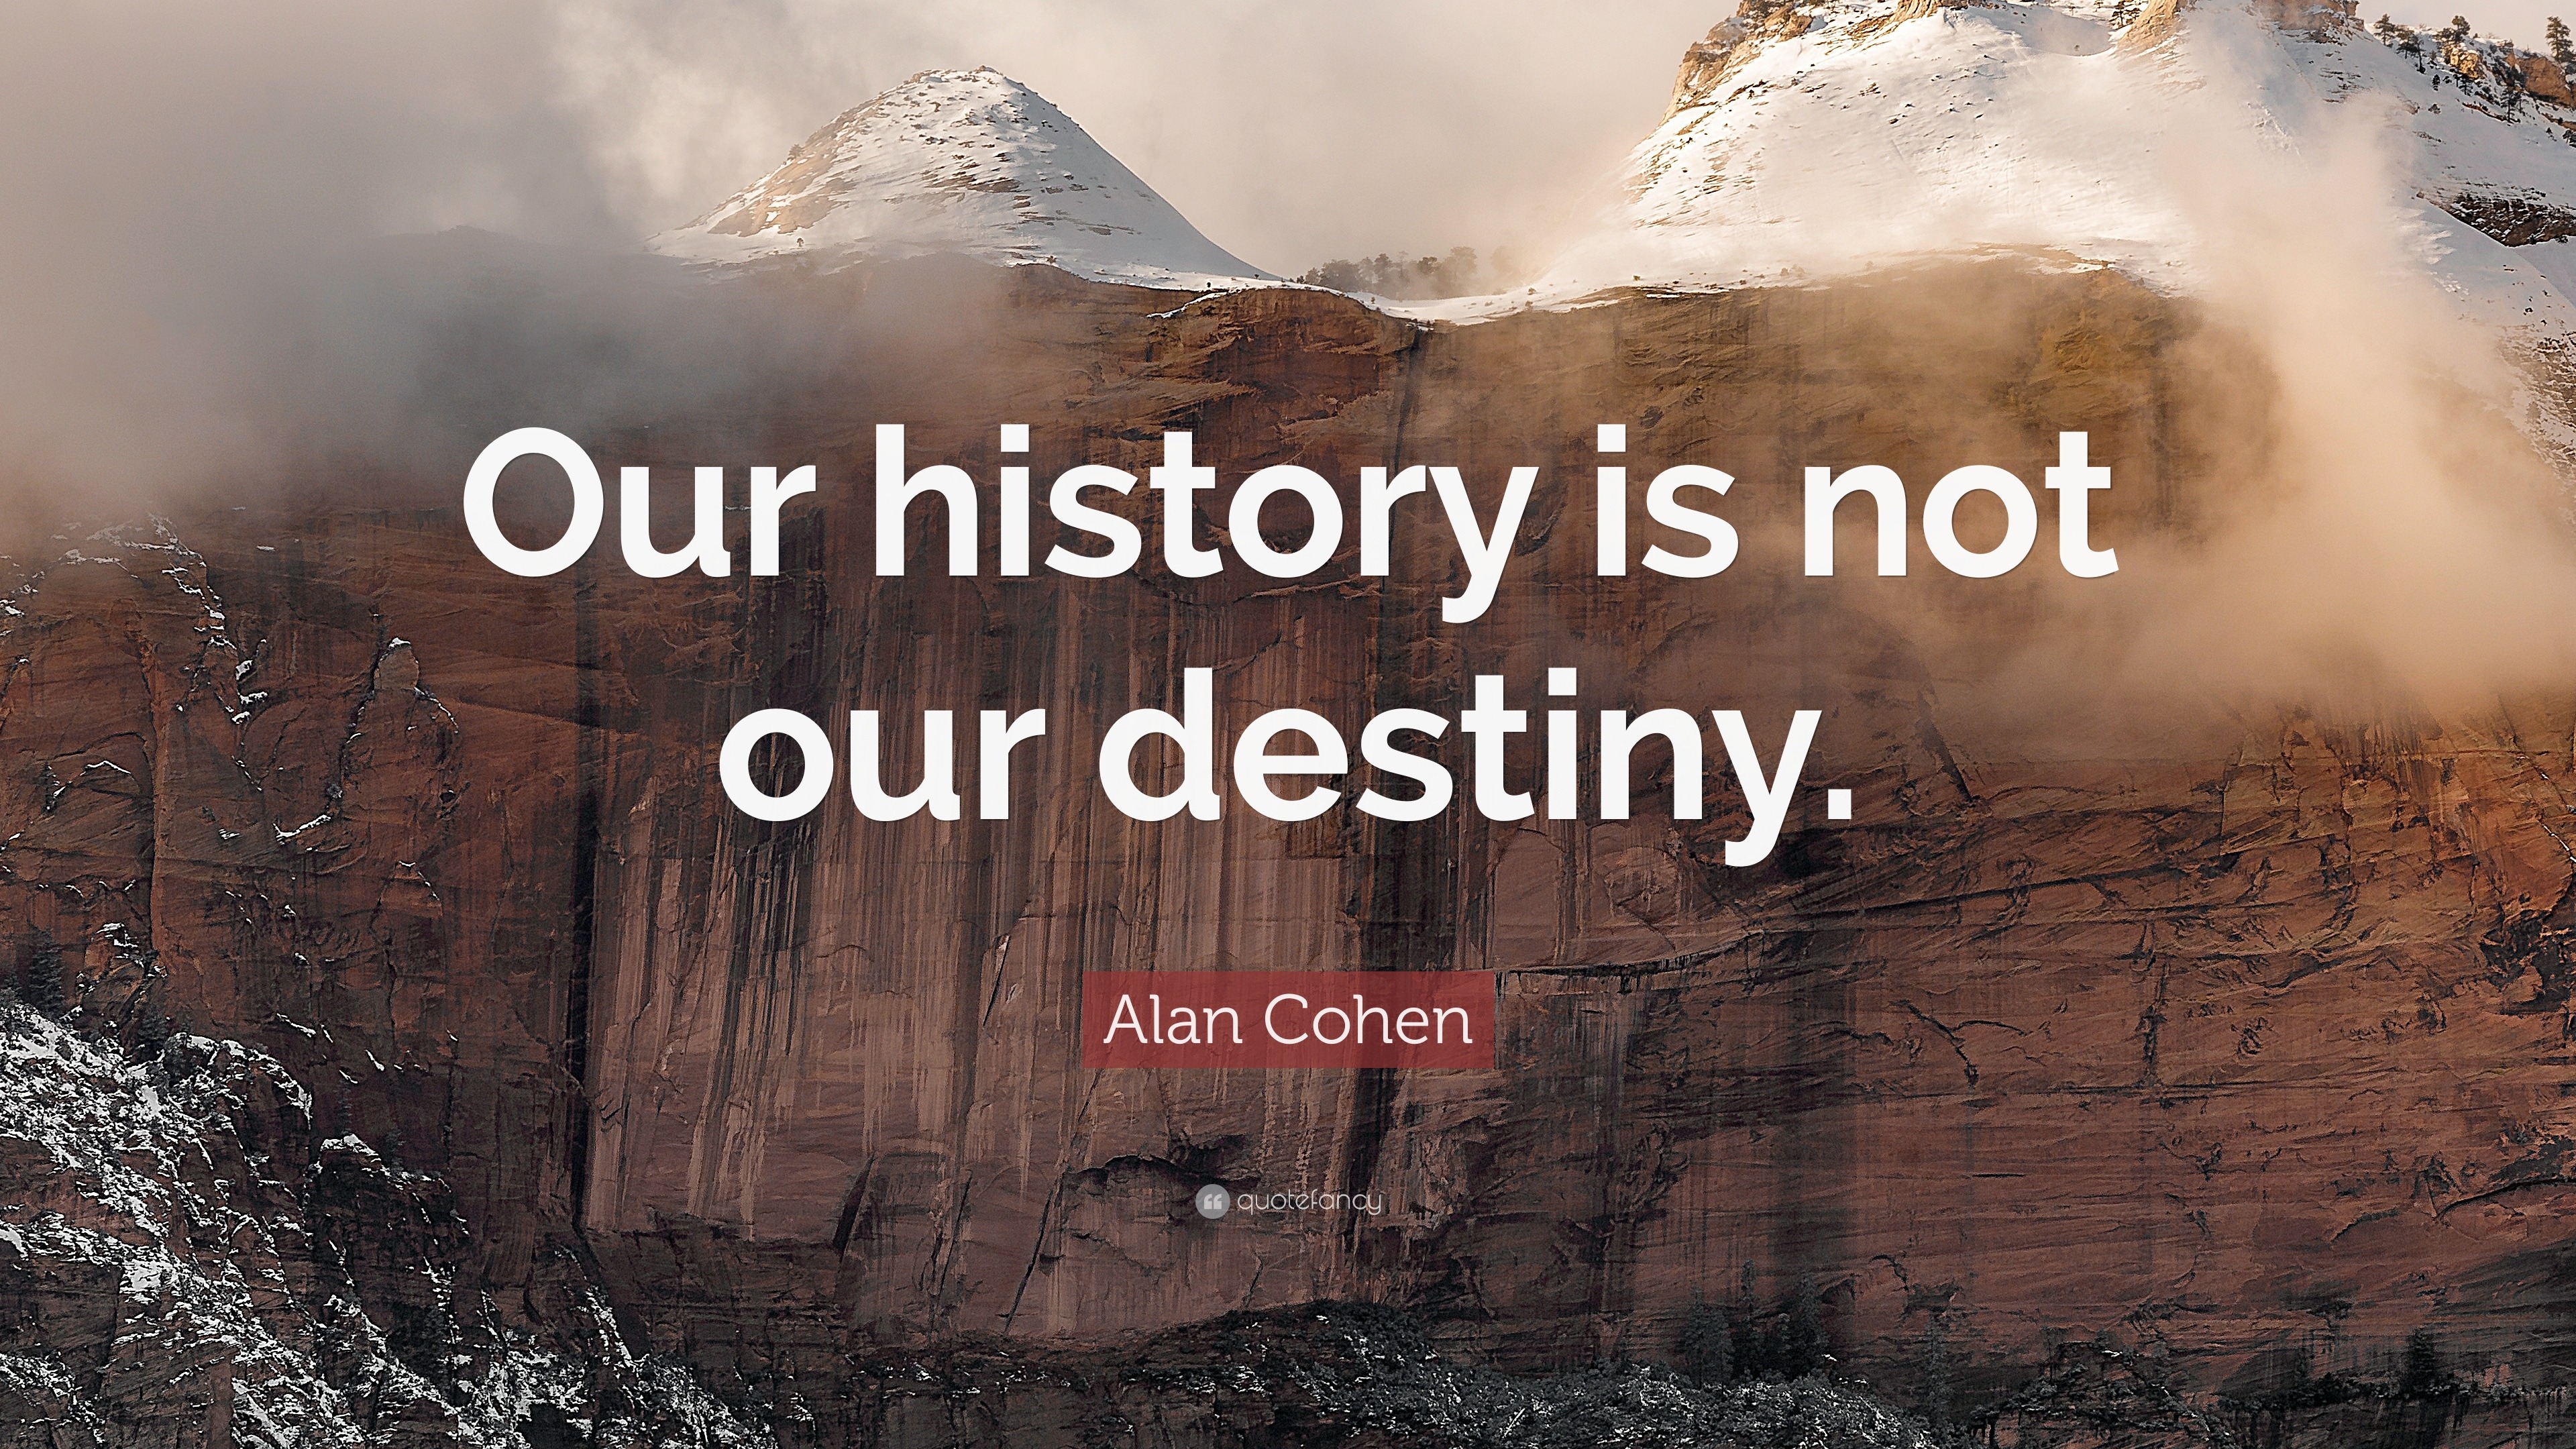 Alan Cohen Quote: “Our history is not our destiny.”